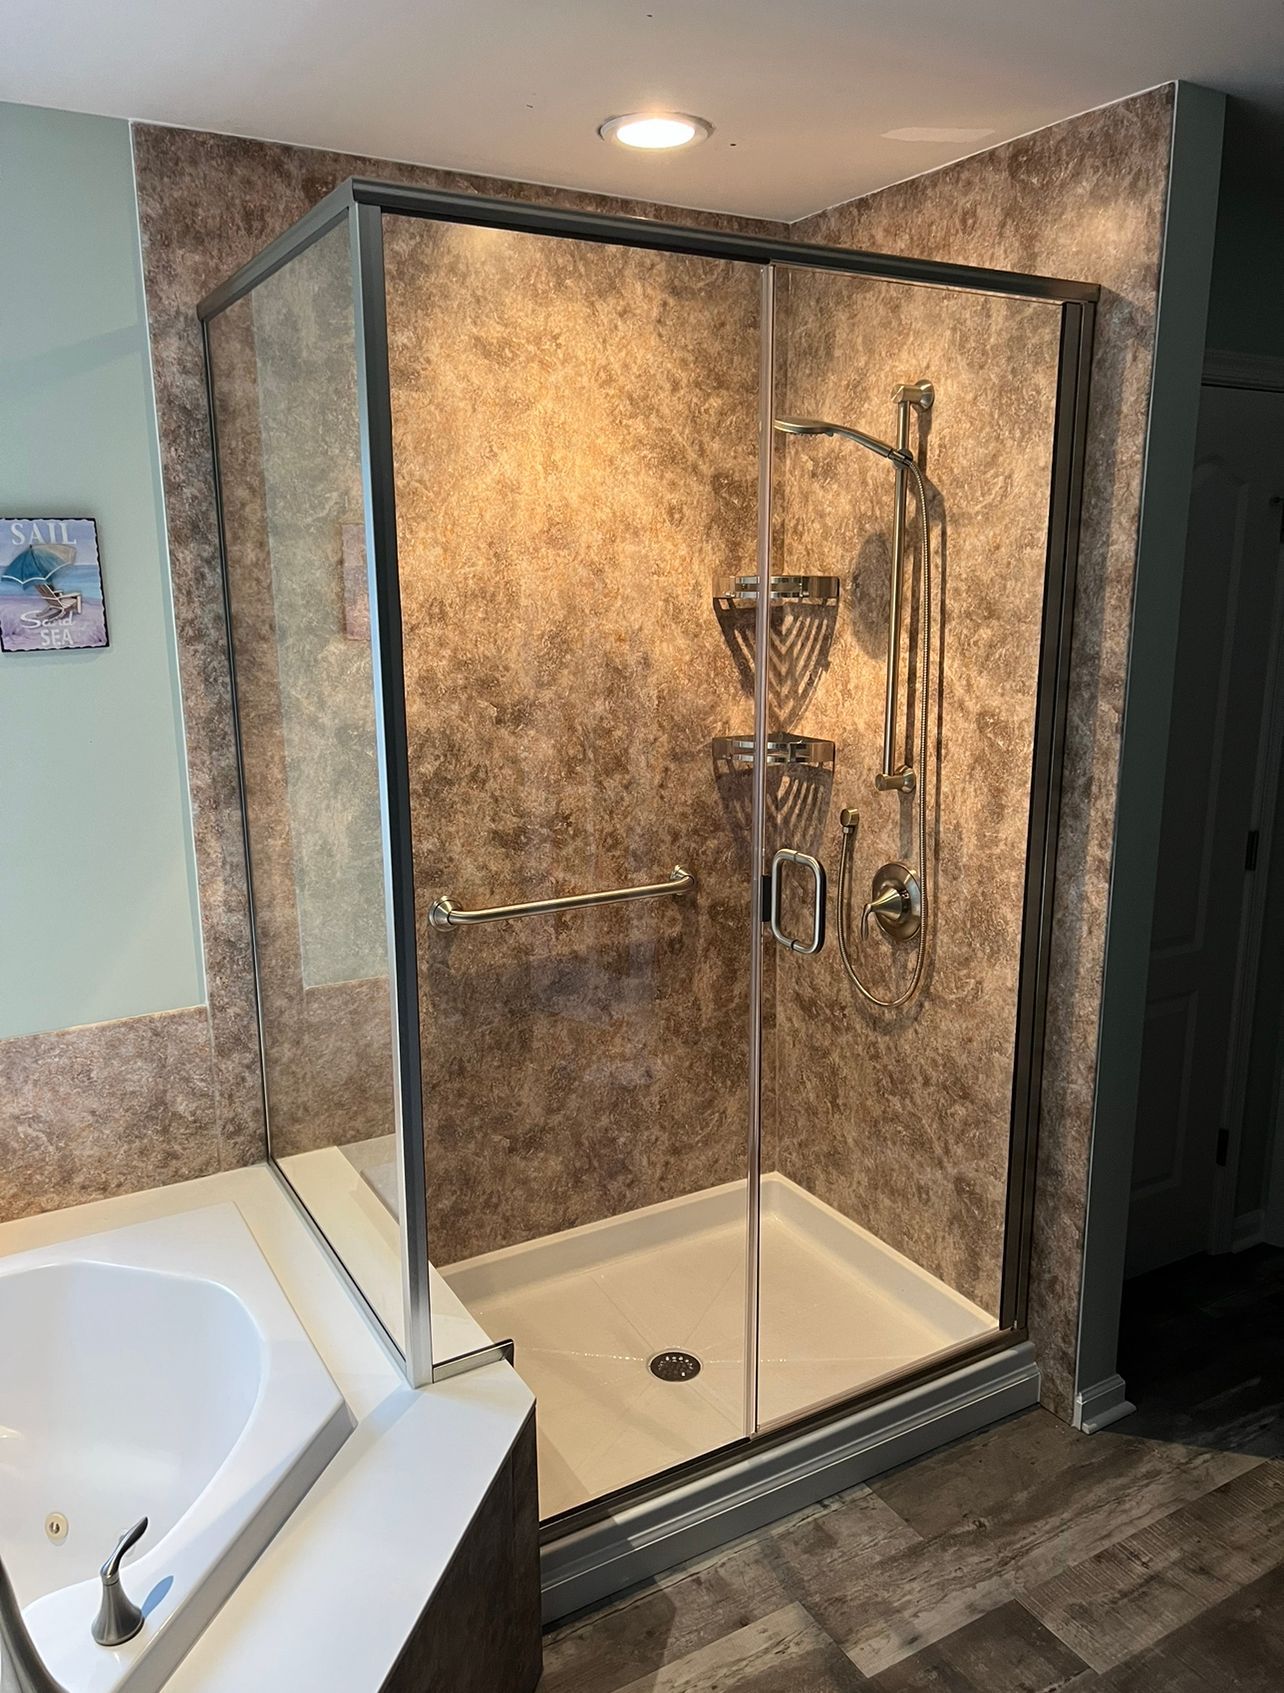 The image of an acrylic shower renovation in Rehoboth Beach, DE